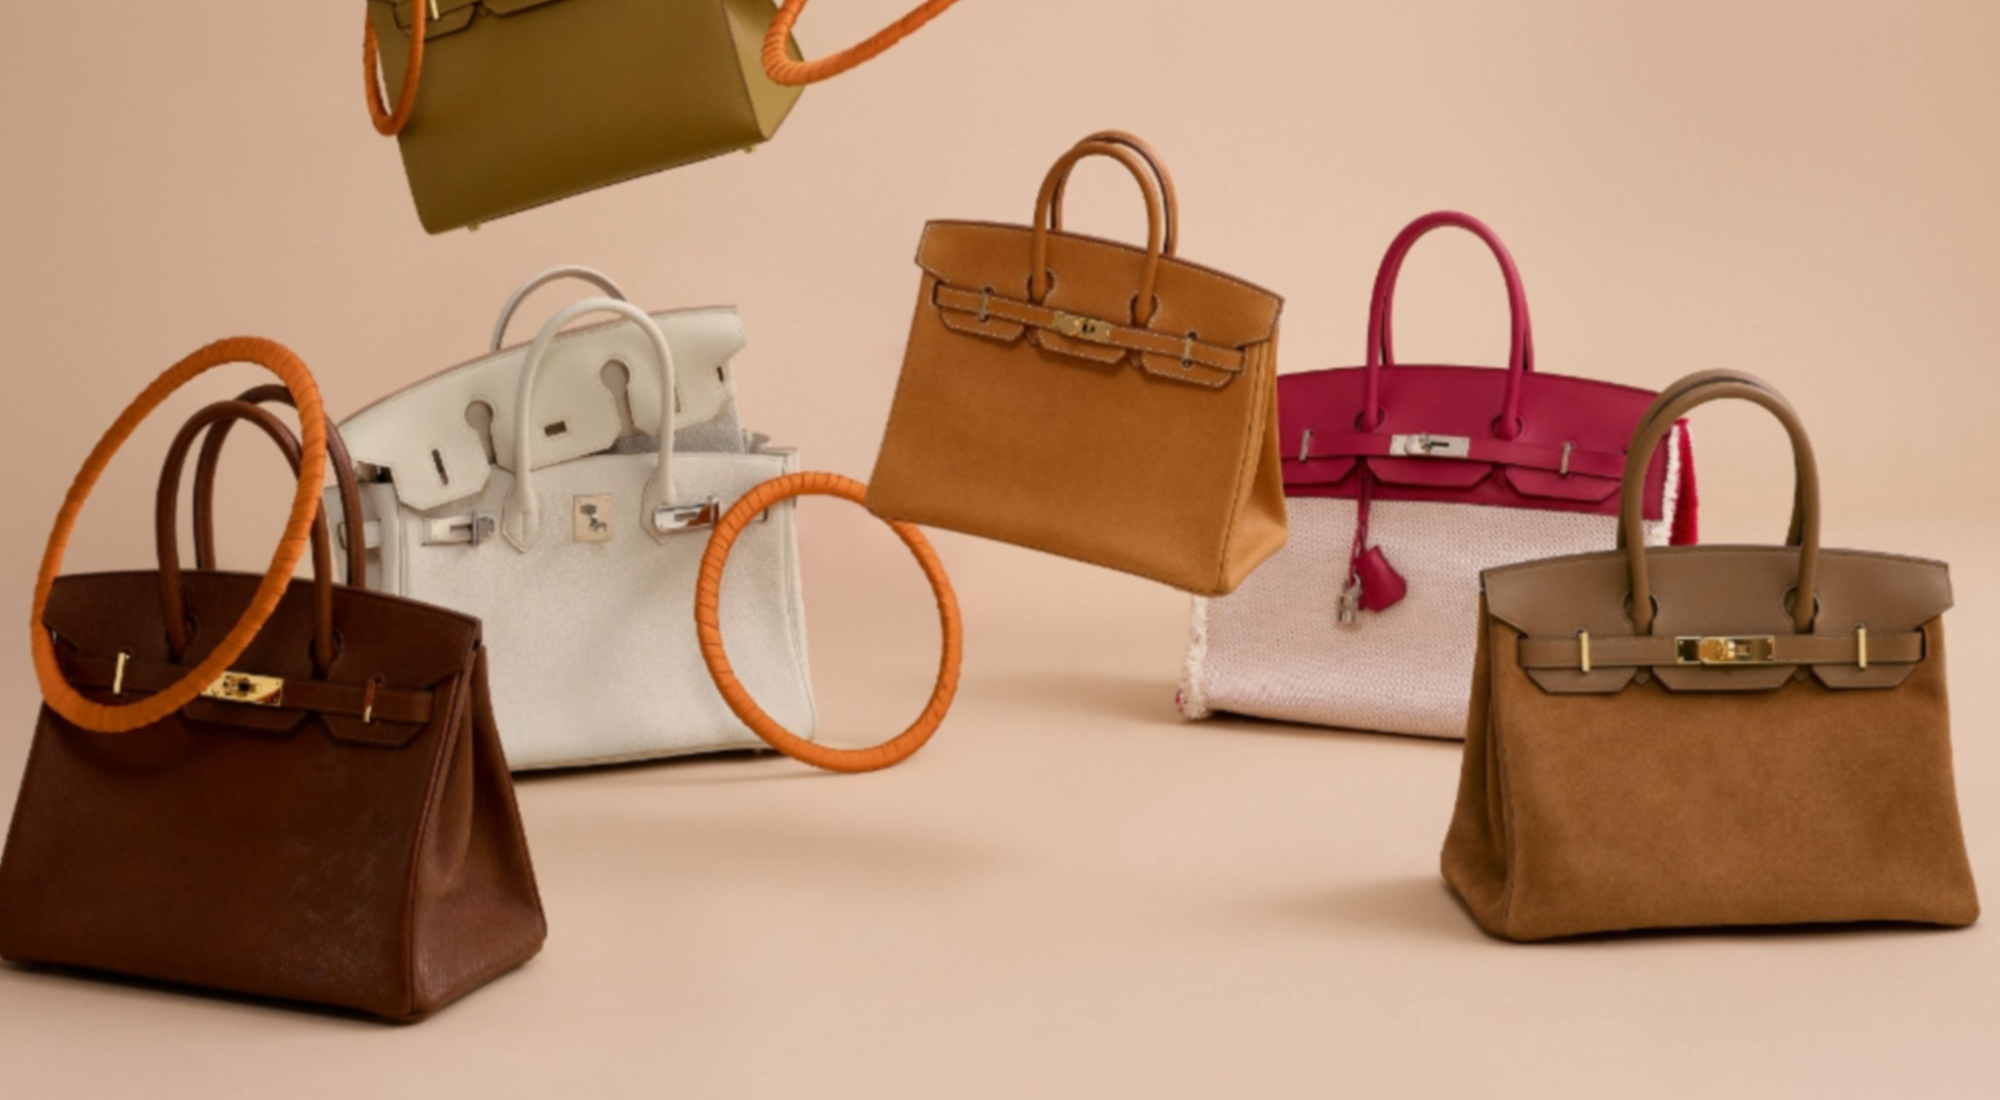 BEST ENTRY-LEVEL HERMES BAGS UNDER $3,000, STARTING YOUR HERMES COLLECTION